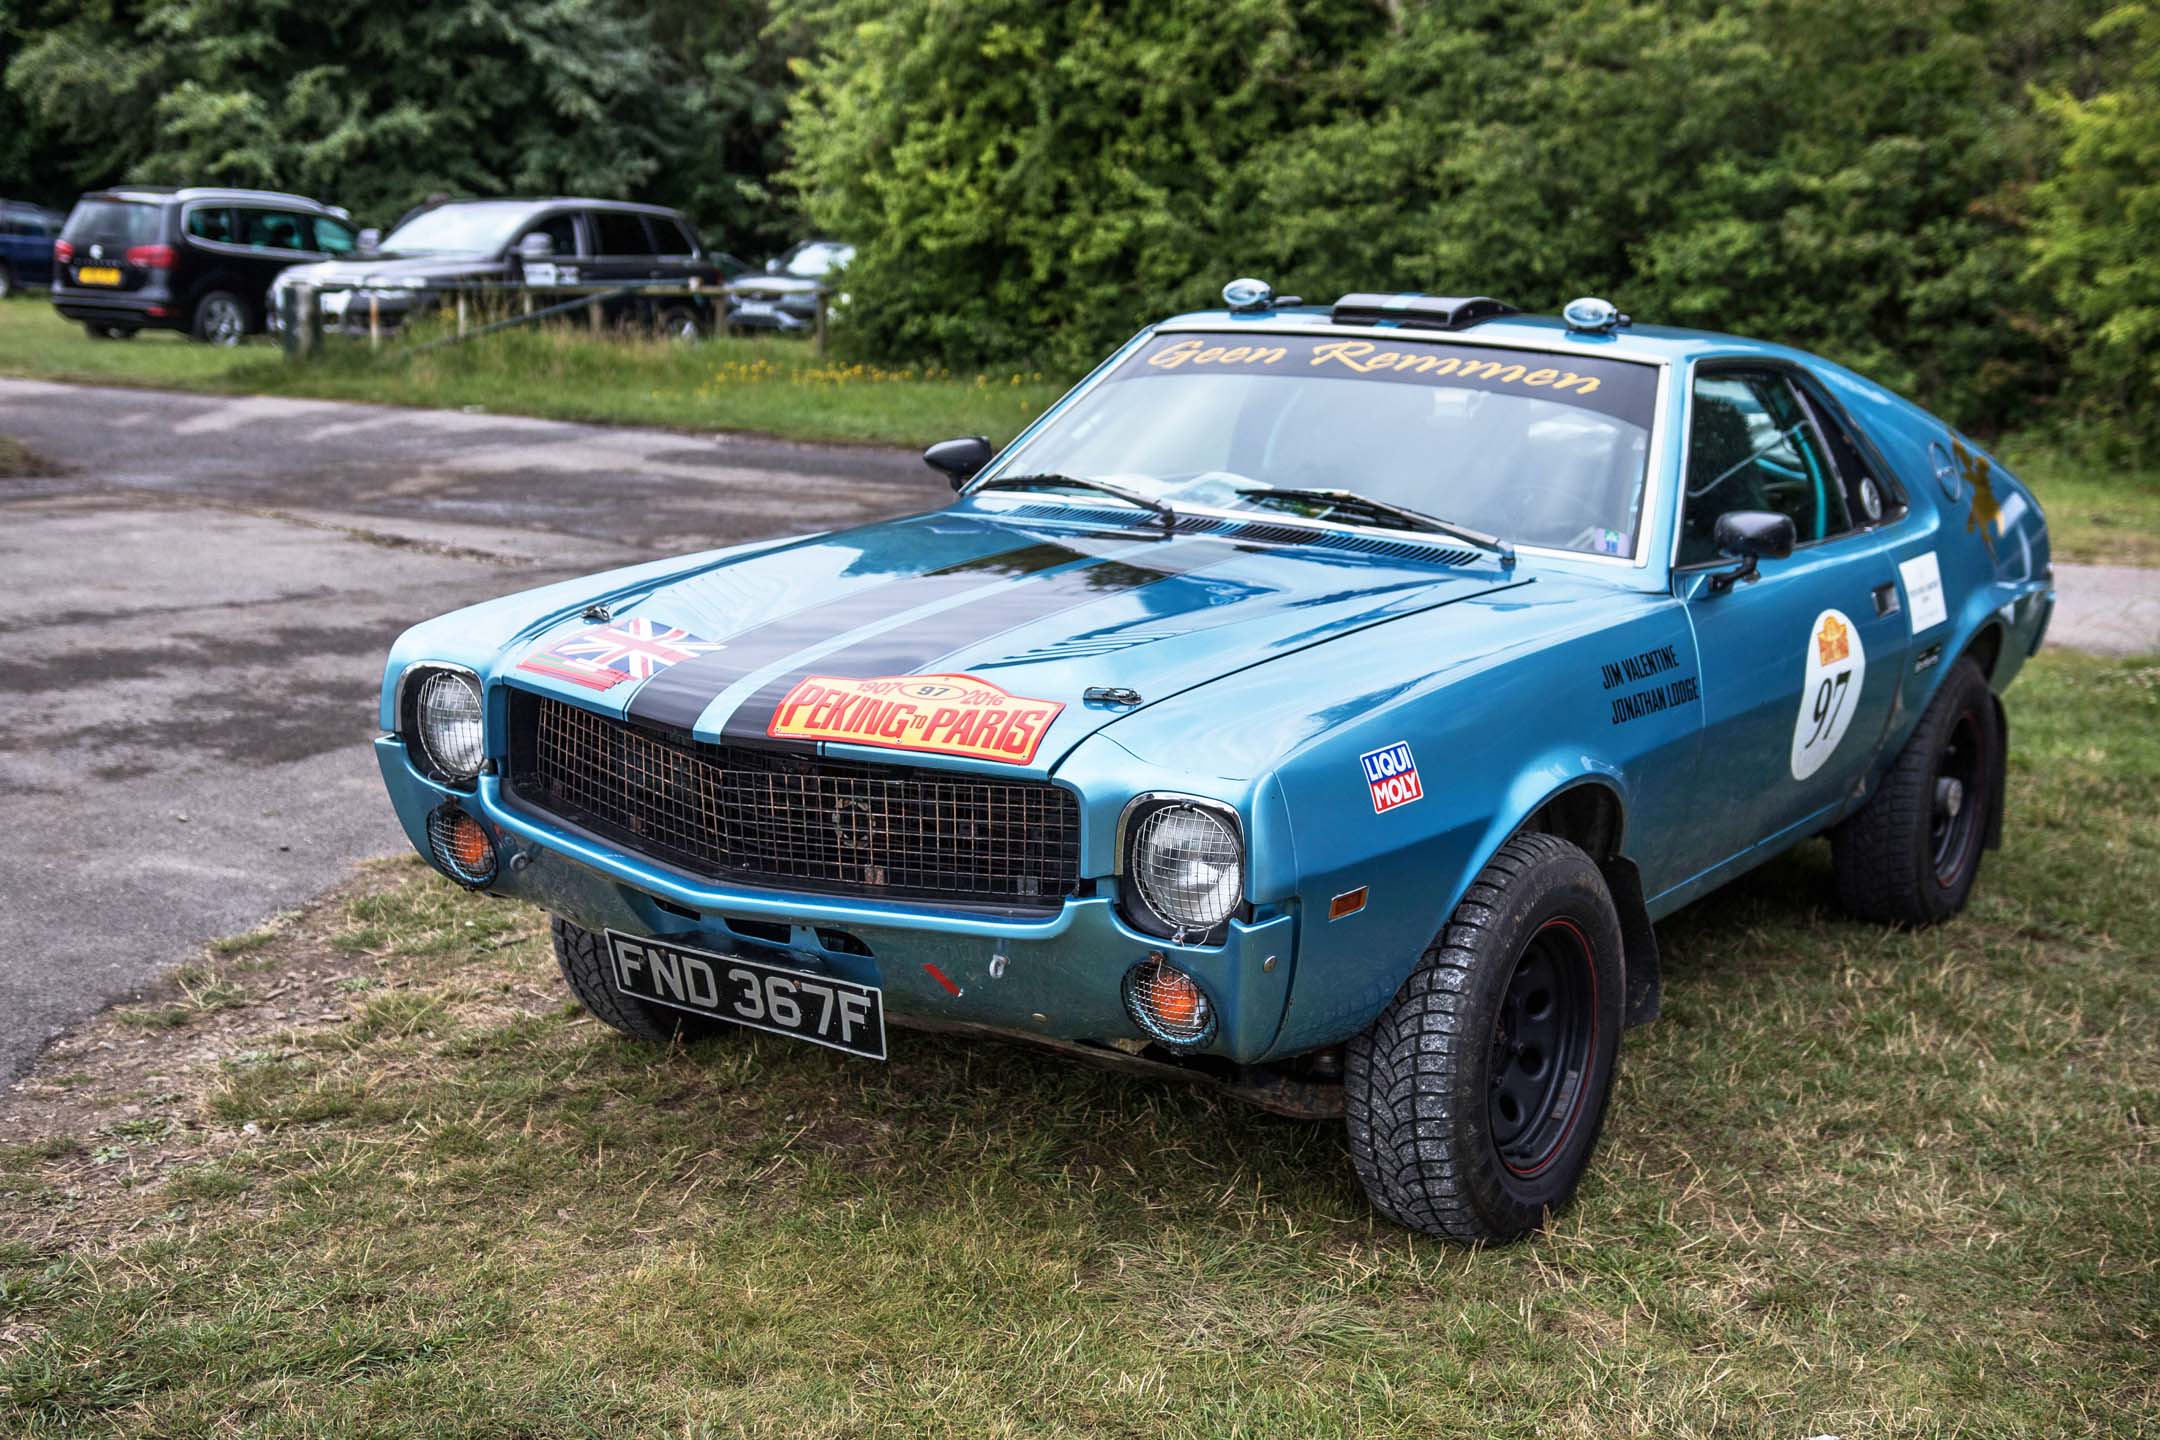 Tucked away in a corner, a lifted AMX shows that anything can be turned into a rally car, provided you’ve got big enough tires. This one had Peking to Paris badges on it, indicating it had hammered across the Gobi desert at one point.